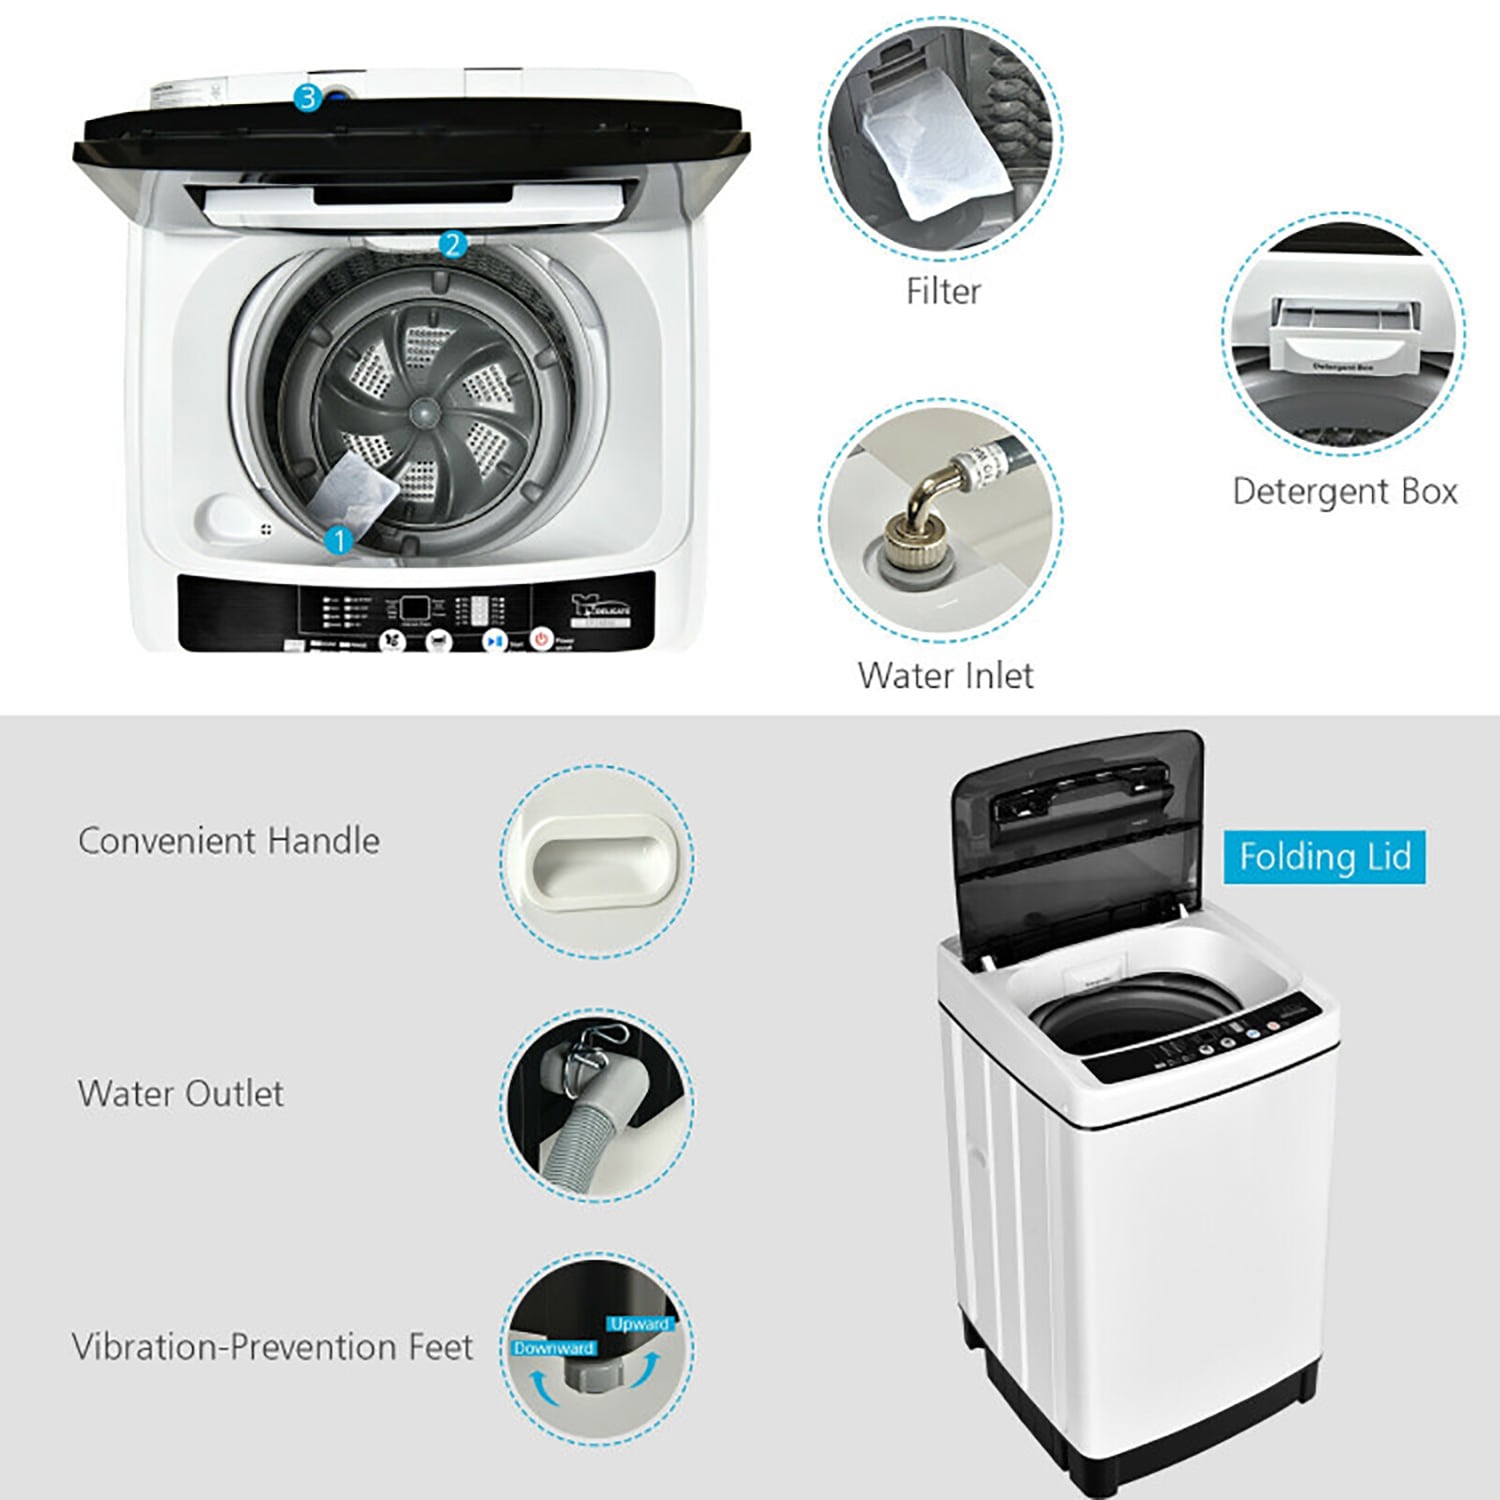 COMFEE' Portable Washing Machine, 0.9 cu.ft Compact Washer With LED Display, 5 Wash Cycles, 2 Built-in Rollers, Space Saving Full-Automatic Washer